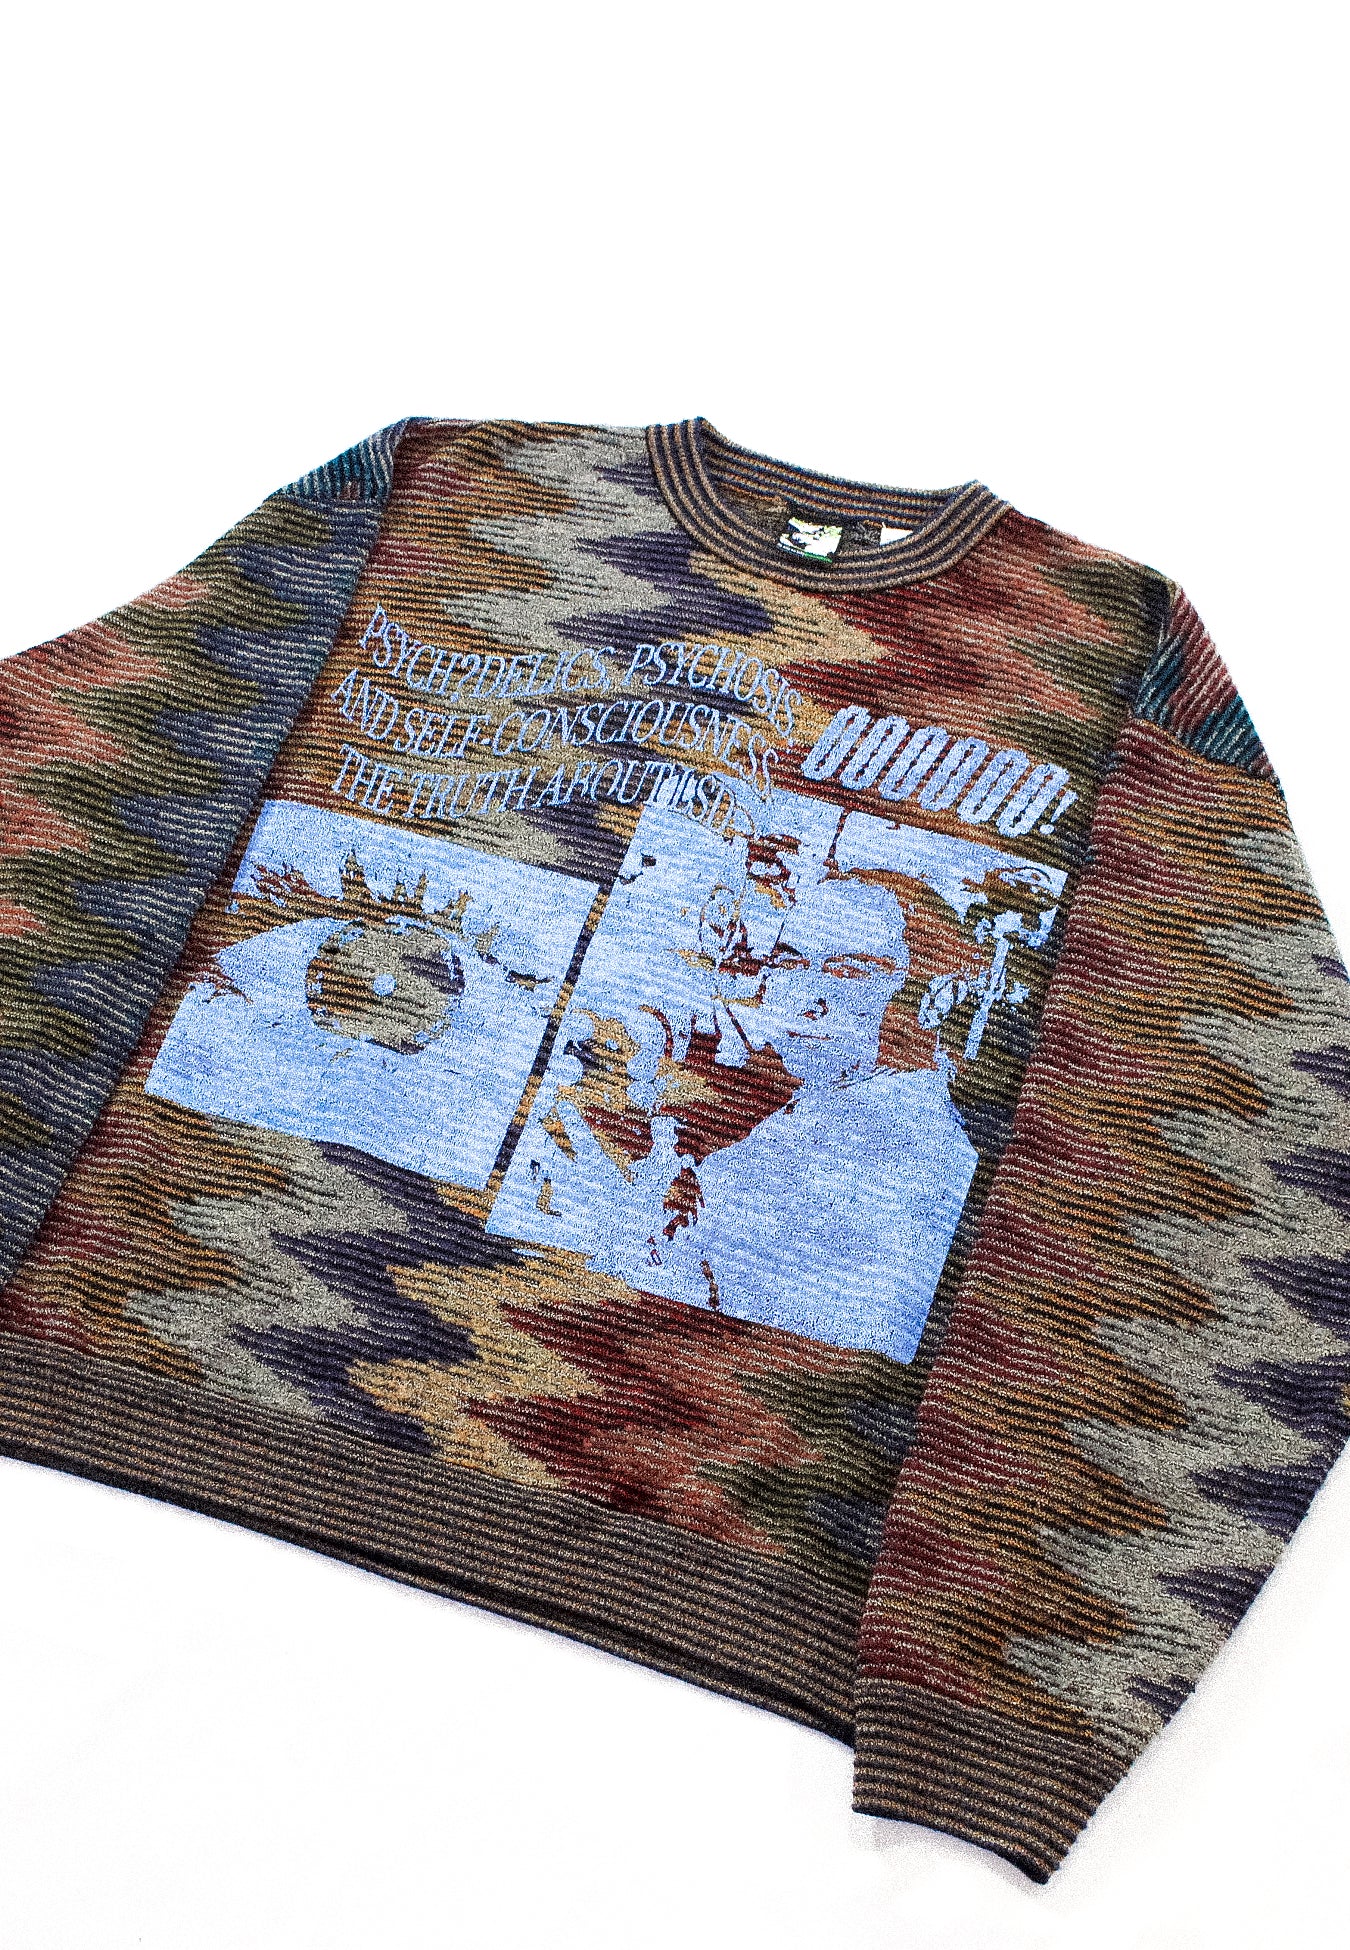 "PSYCHEDELICS, PSYCHOSIS, AND SELF-CONSCIOUSNESS" Heavyweight Knit (XL)